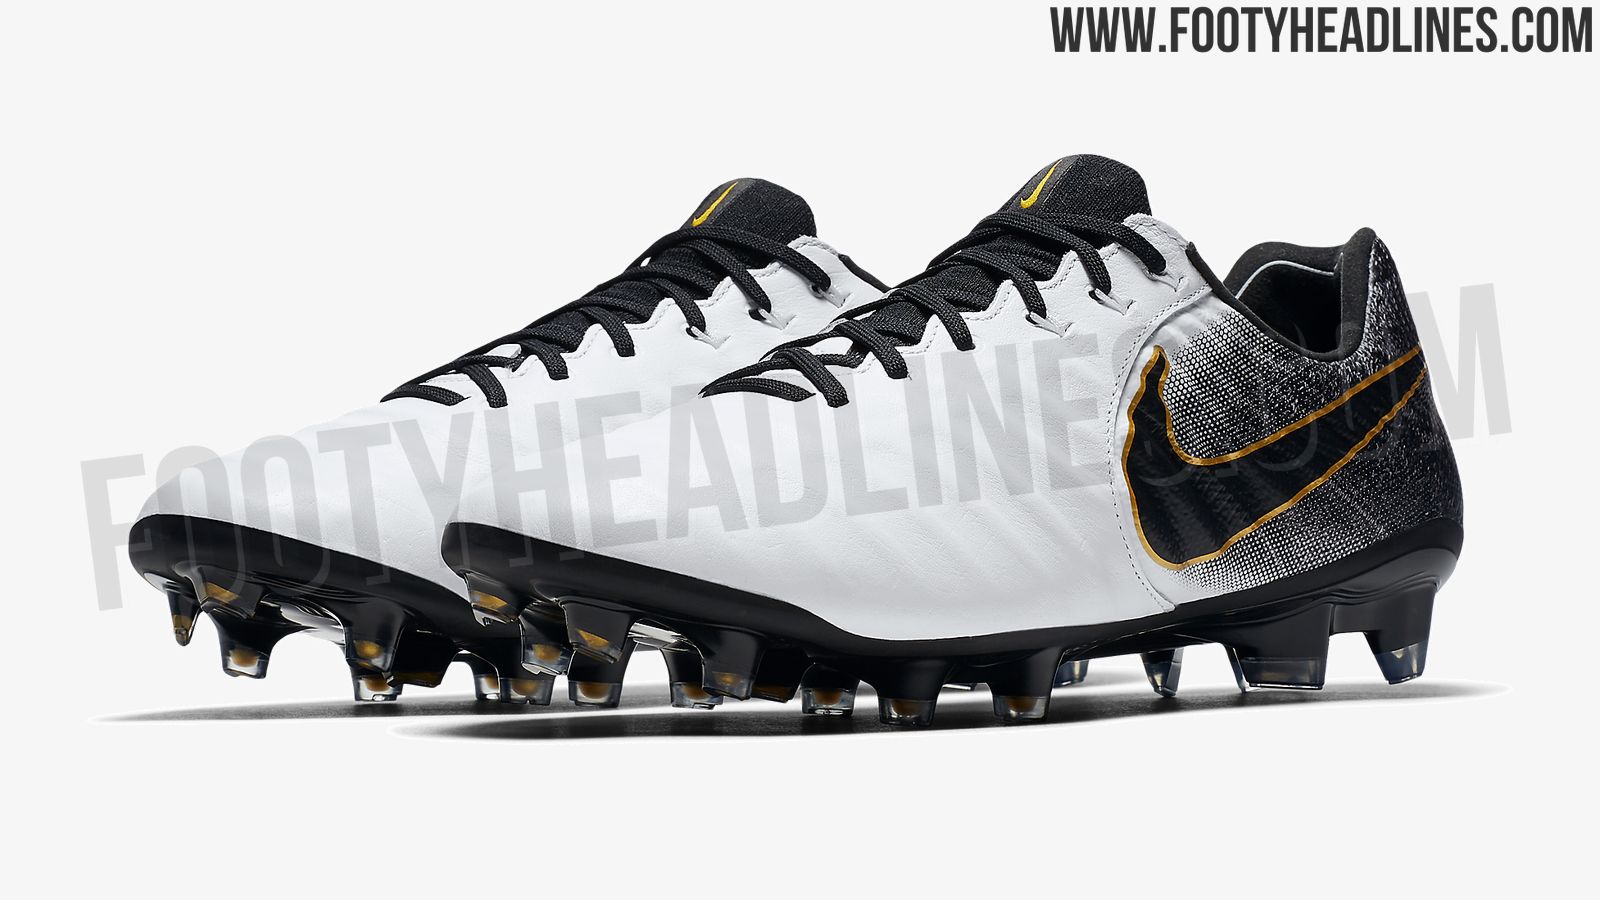 White Black Gold Nike Tiempo 2018 Boots Released Footy Headlines